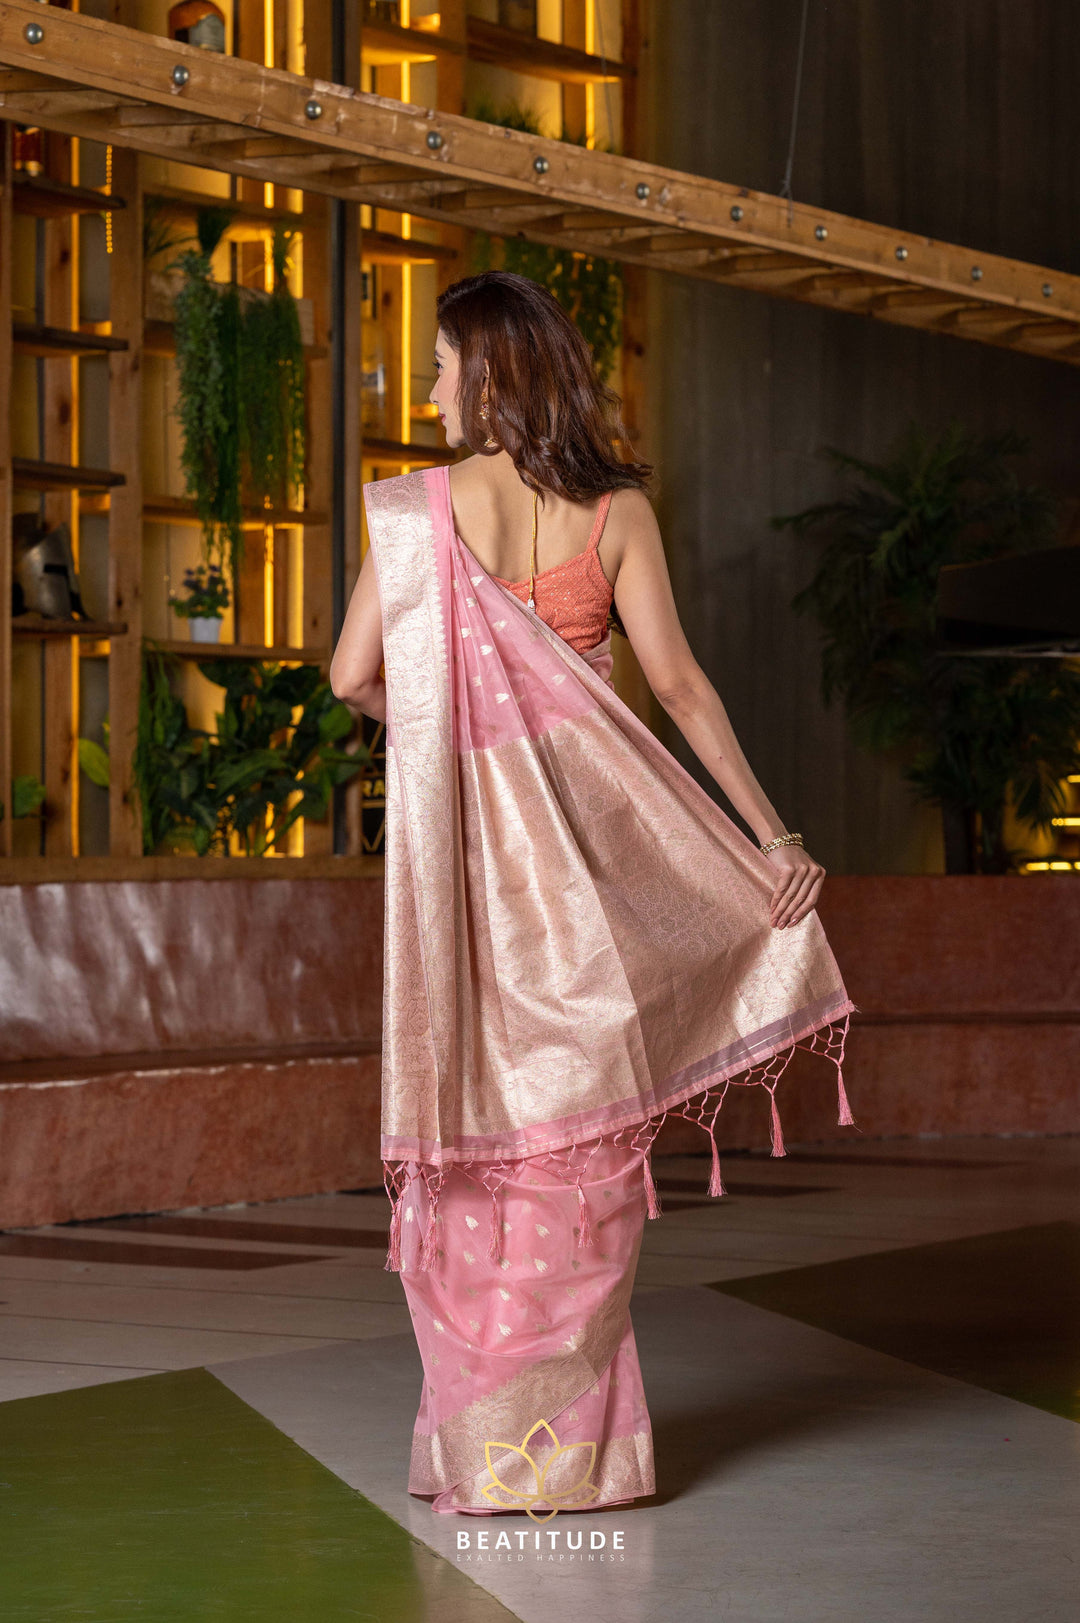 Beatitude Pink Gold-Toned Woven Design Zari Chanderi Saree with Unstitched Blouse